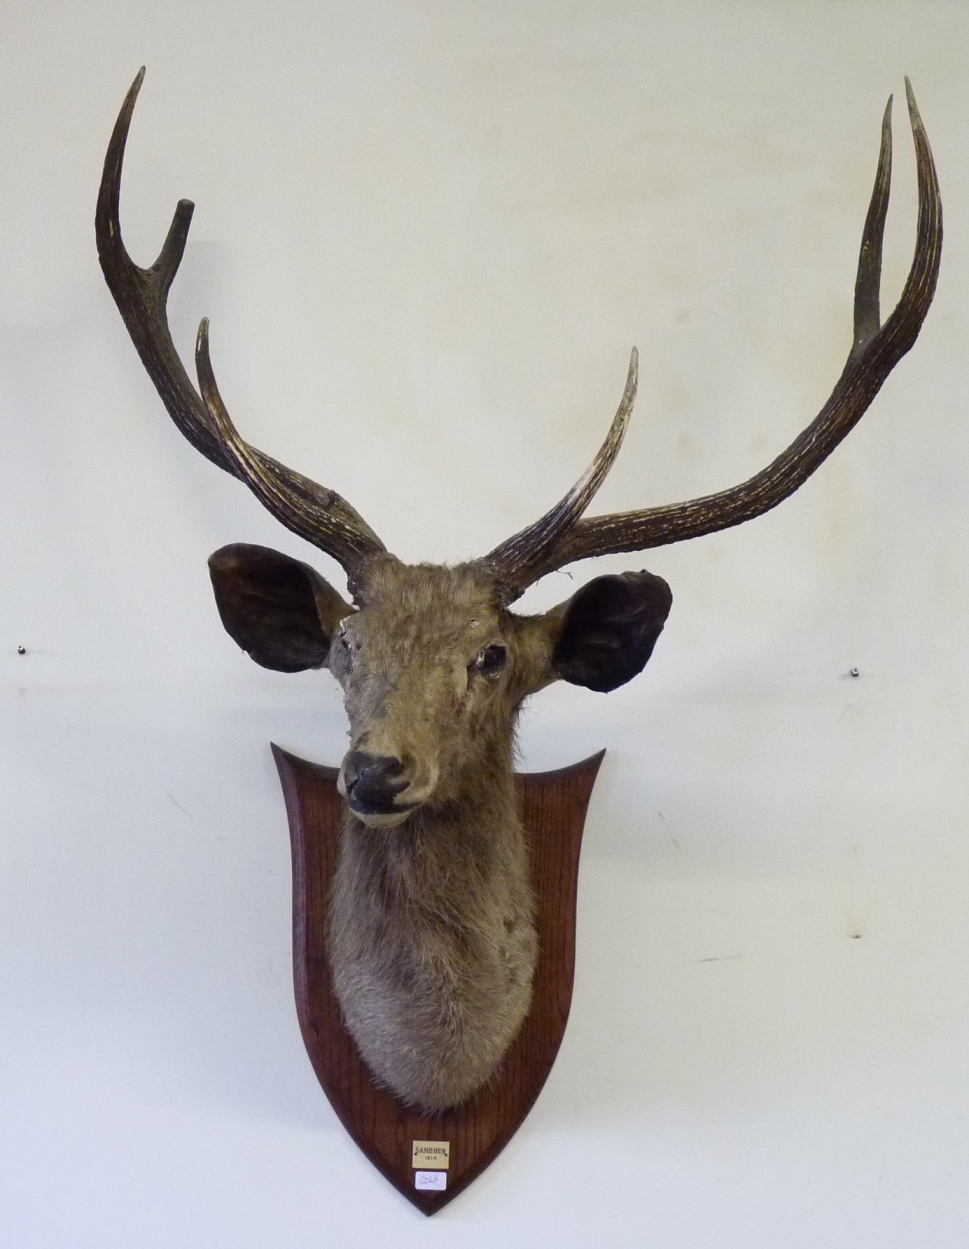 A Red Deer stags head mounted on an oak shield with plaque "Sambhur 1914"